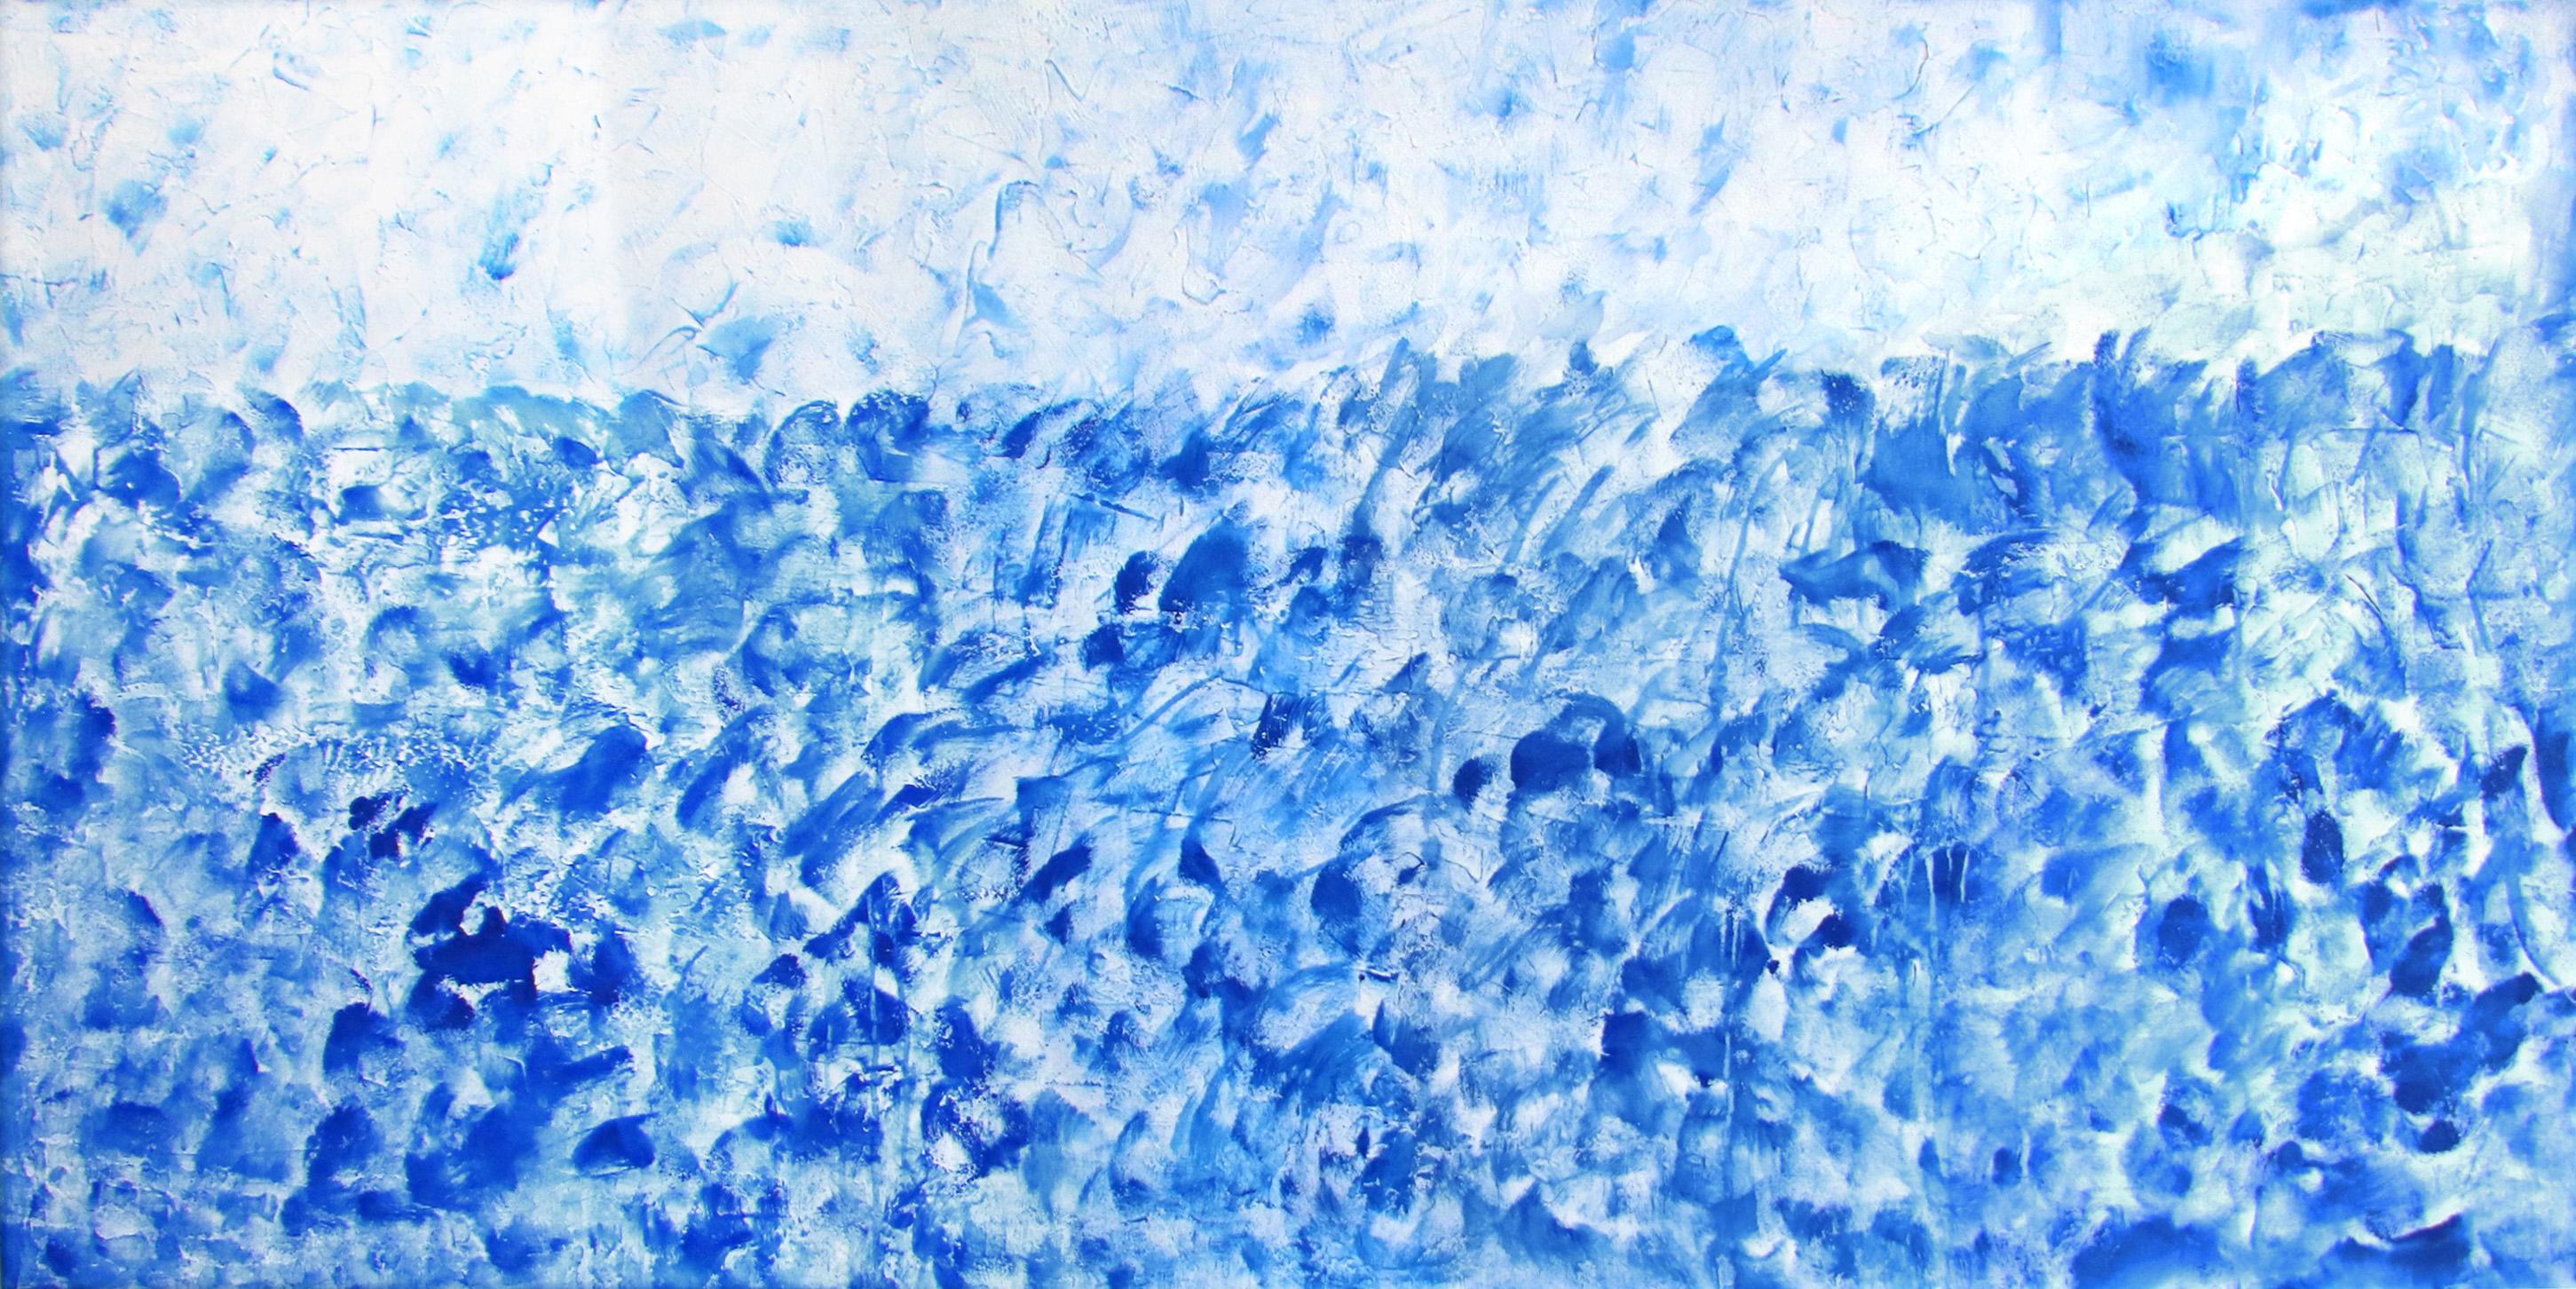 Fields of Blue - Large Textured Blue and White Abstract Painting - Mixed Media Art by Clara Berta